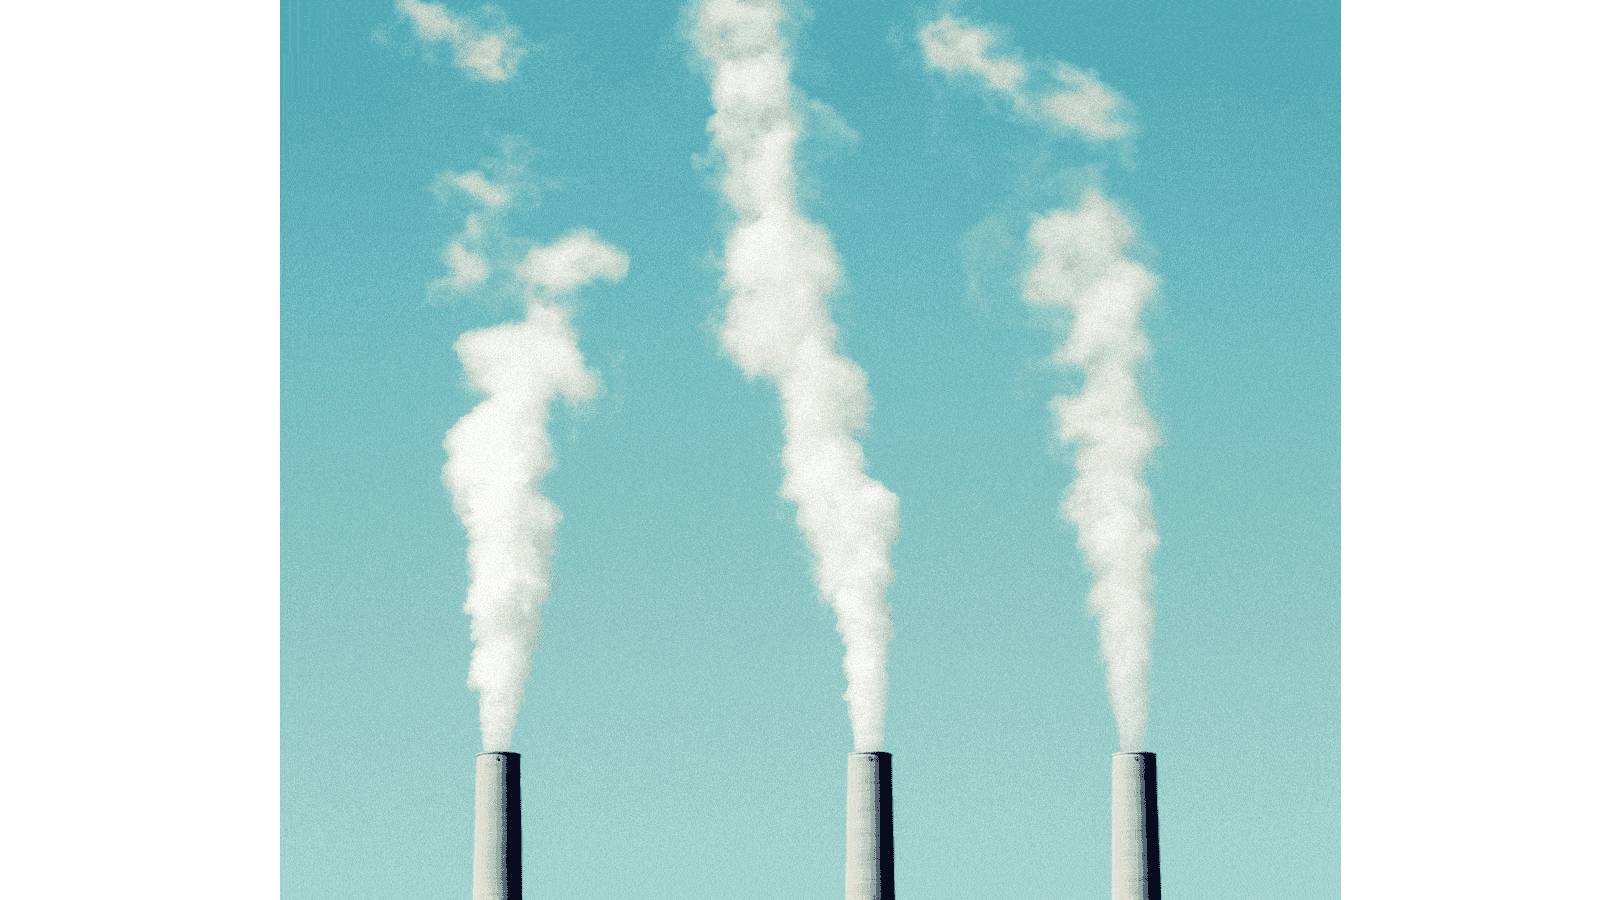 Animation: three smokestacks with smoke disappearing against a blue sky